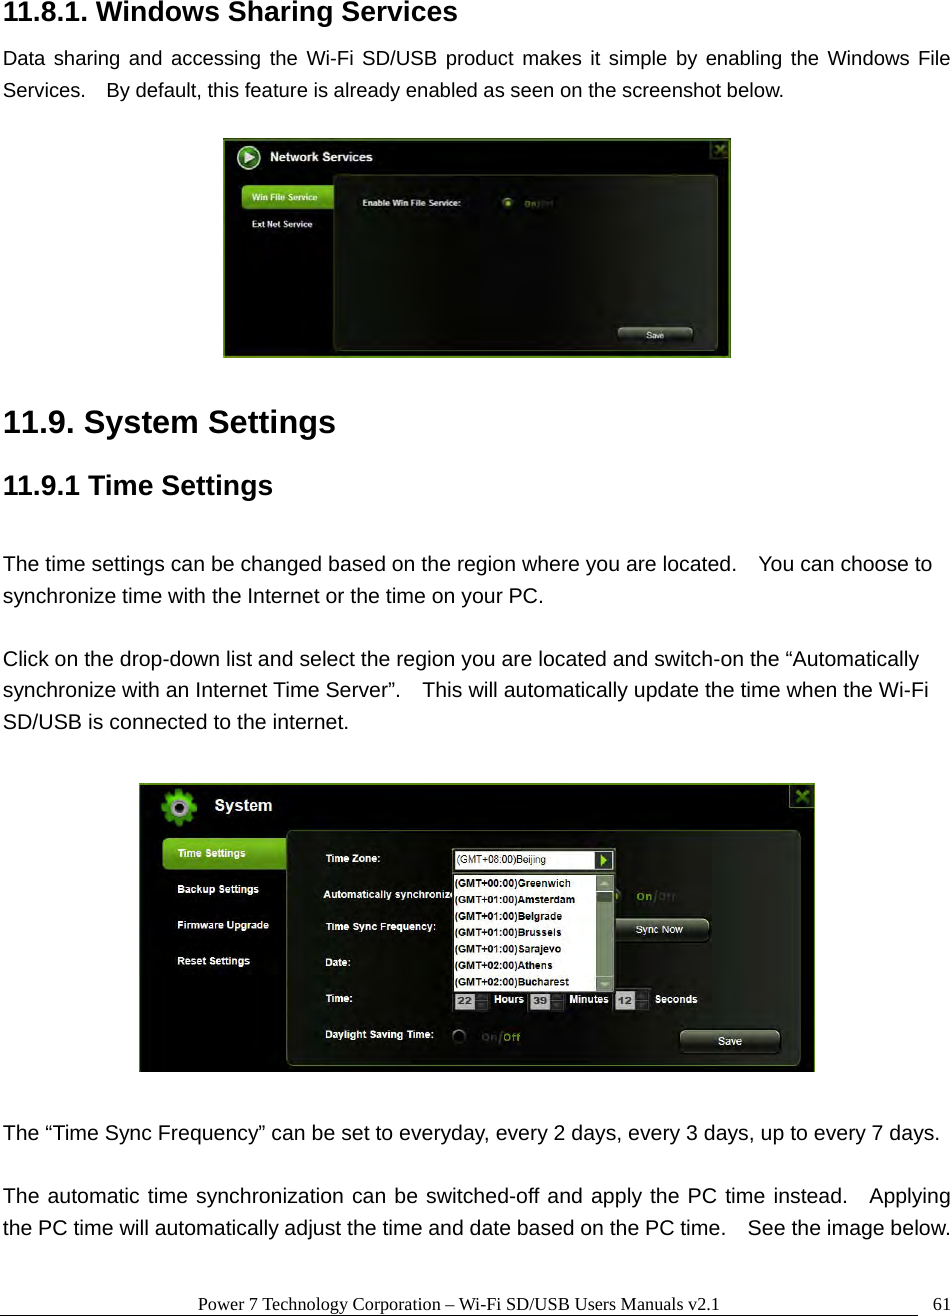 Power 7 Technology Corporation – Wi-Fi SD/USB Users Manuals v2.1  6111.8.1. Windows Sharing Services Data sharing and accessing the Wi-Fi SD/USB product makes it simple by enabling the Windows File Services.    By default, this feature is already enabled as seen on the screenshot below.    11.9. System Settings 11.9.1 Time Settings  The time settings can be changed based on the region where you are located.    You can choose to synchronize time with the Internet or the time on your PC.    Click on the drop-down list and select the region you are located and switch-on the “Automatically synchronize with an Internet Time Server”.    This will automatically update the time when the Wi-Fi SD/USB is connected to the internet.        The “Time Sync Frequency” can be set to everyday, every 2 days, every 3 days, up to every 7 days.  The automatic time synchronization can be switched-off and apply the PC time instead.  Applying the PC time will automatically adjust the time and date based on the PC time.    See the image below.  